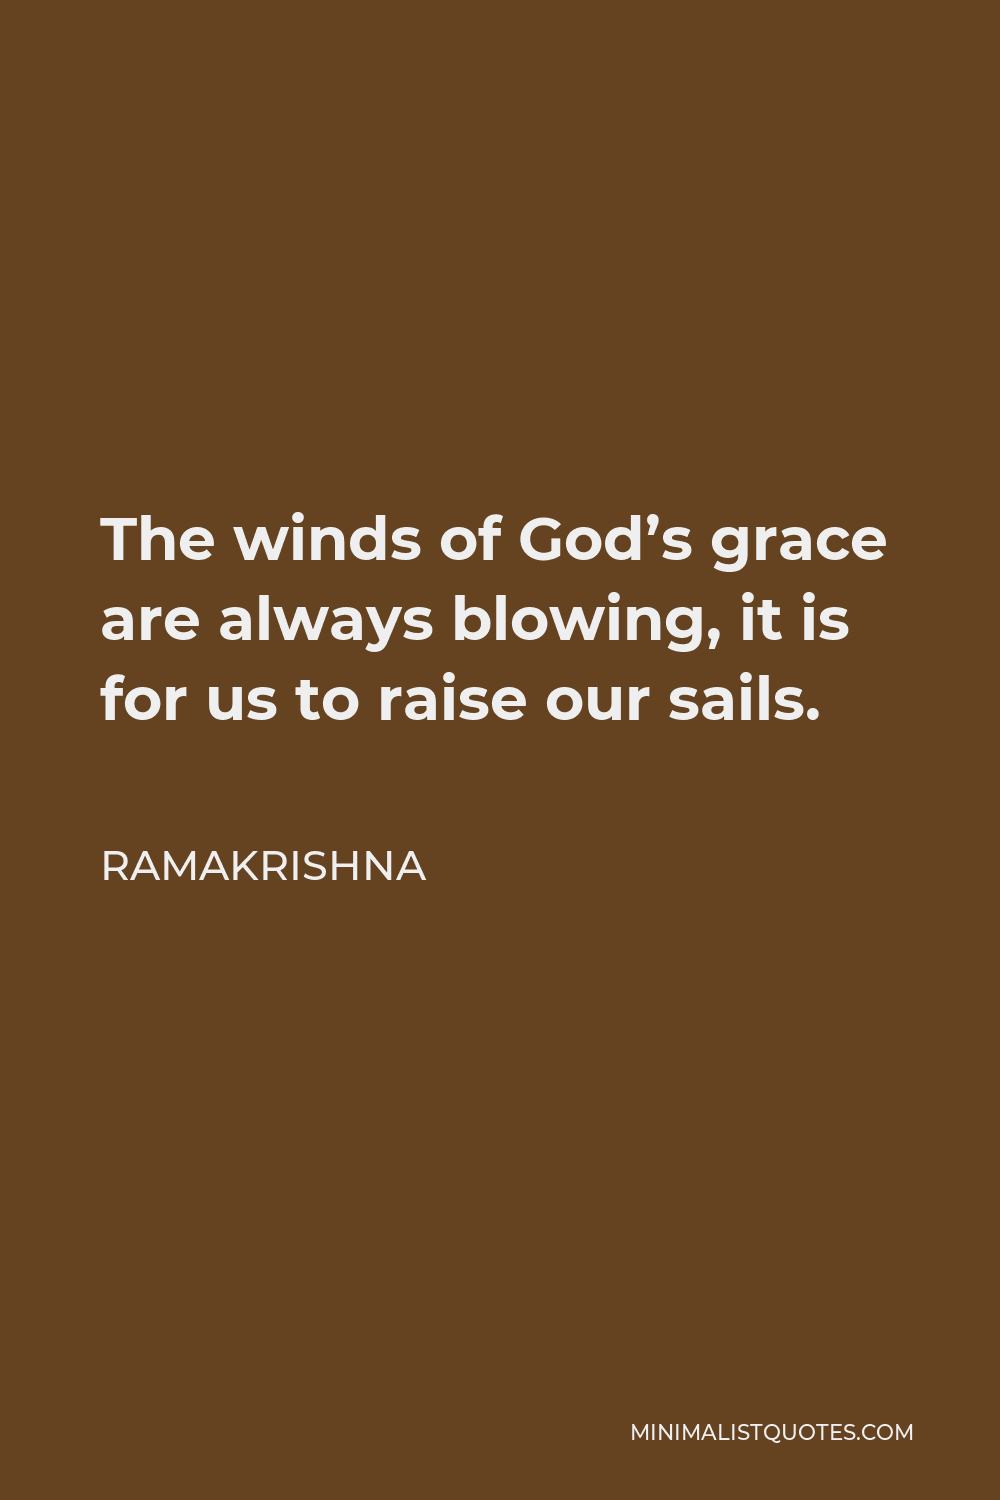 Ramakrishna Quote - The winds of God’s grace are always blowing, it is for us to raise our sails.